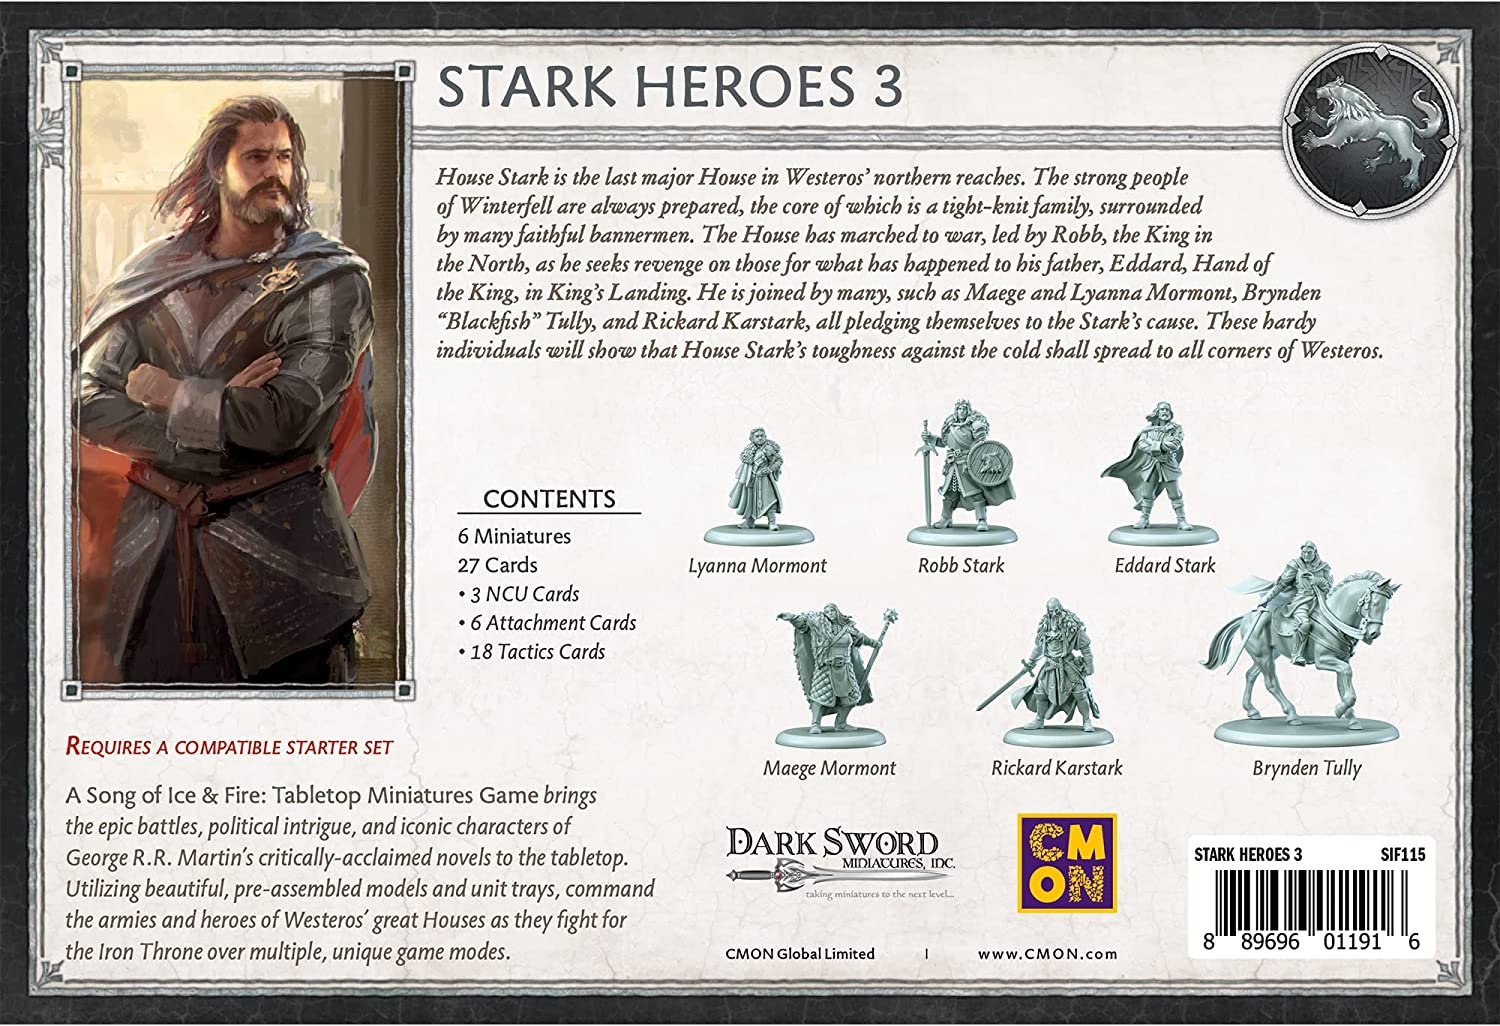 A Song of Ice and Fire - Stark: Heroes 3